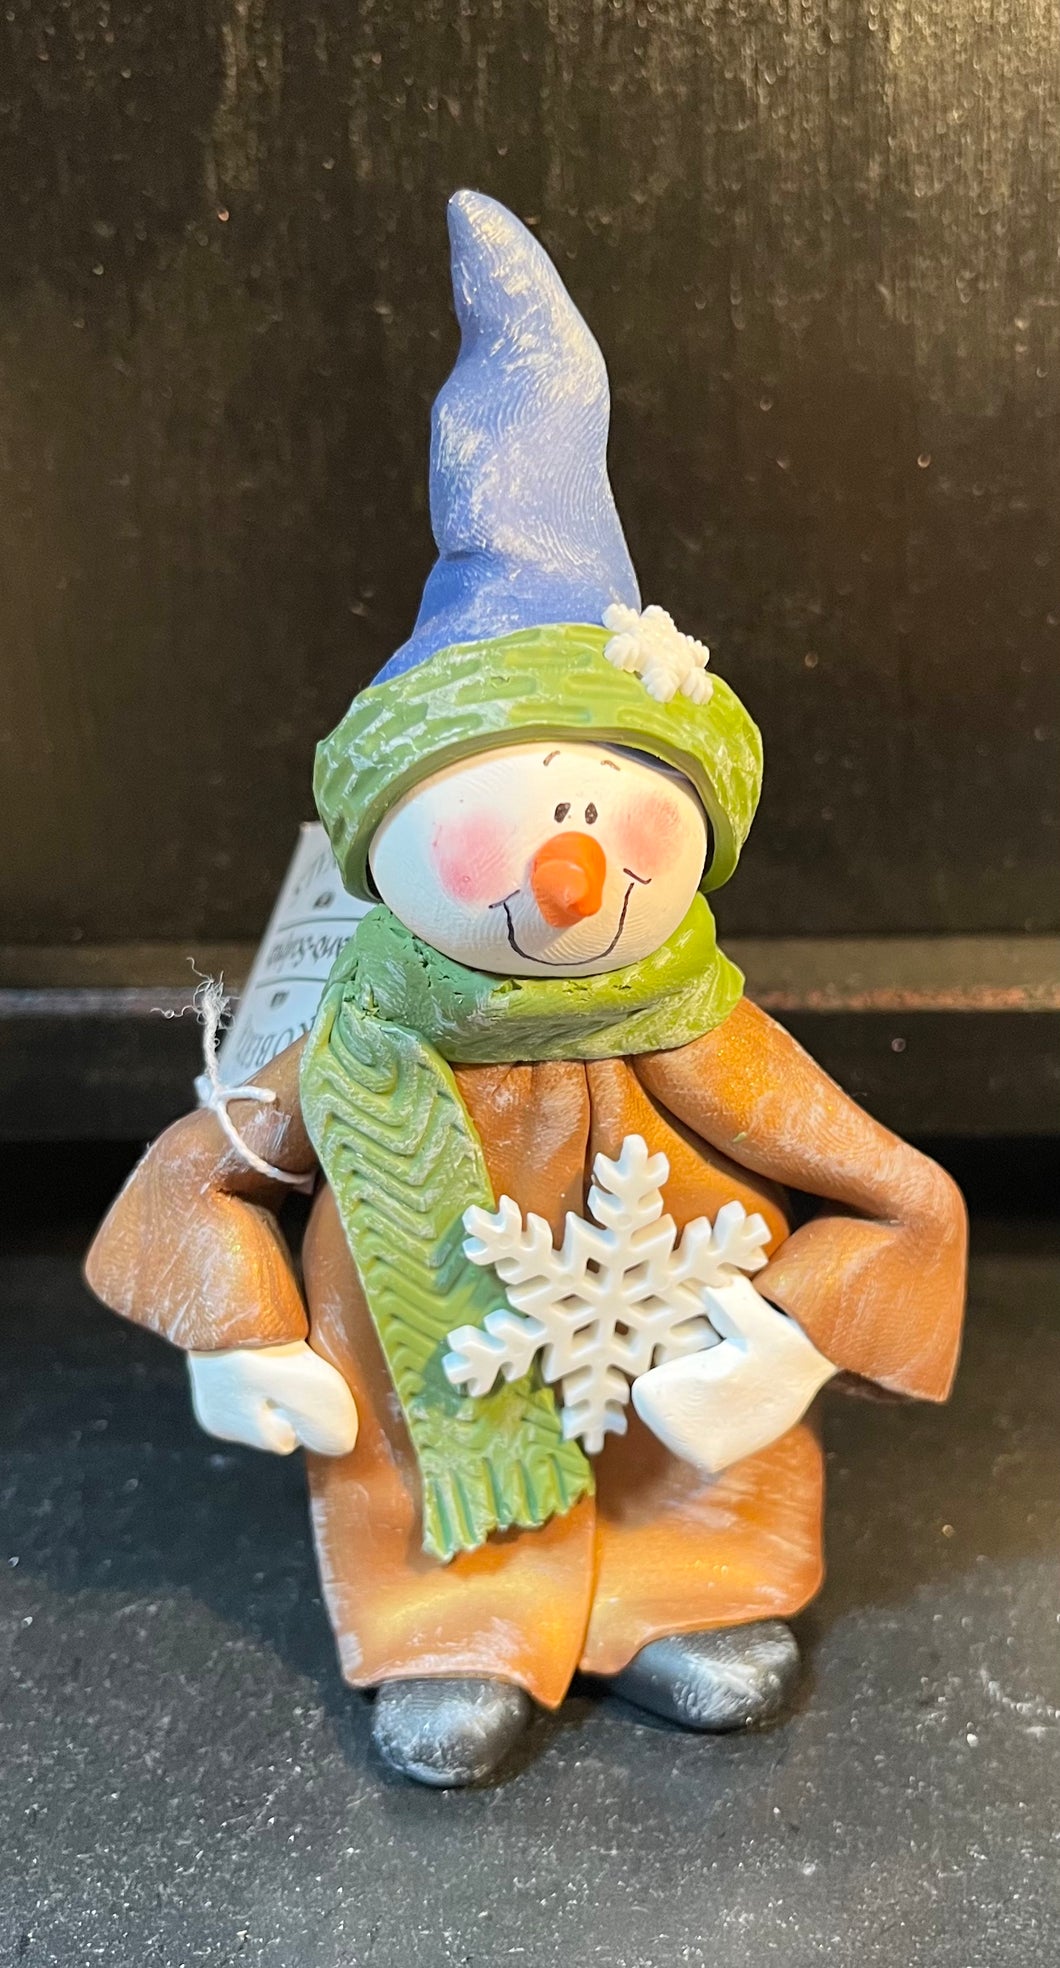 Shorty Snowman #169 One-of-a-Kind